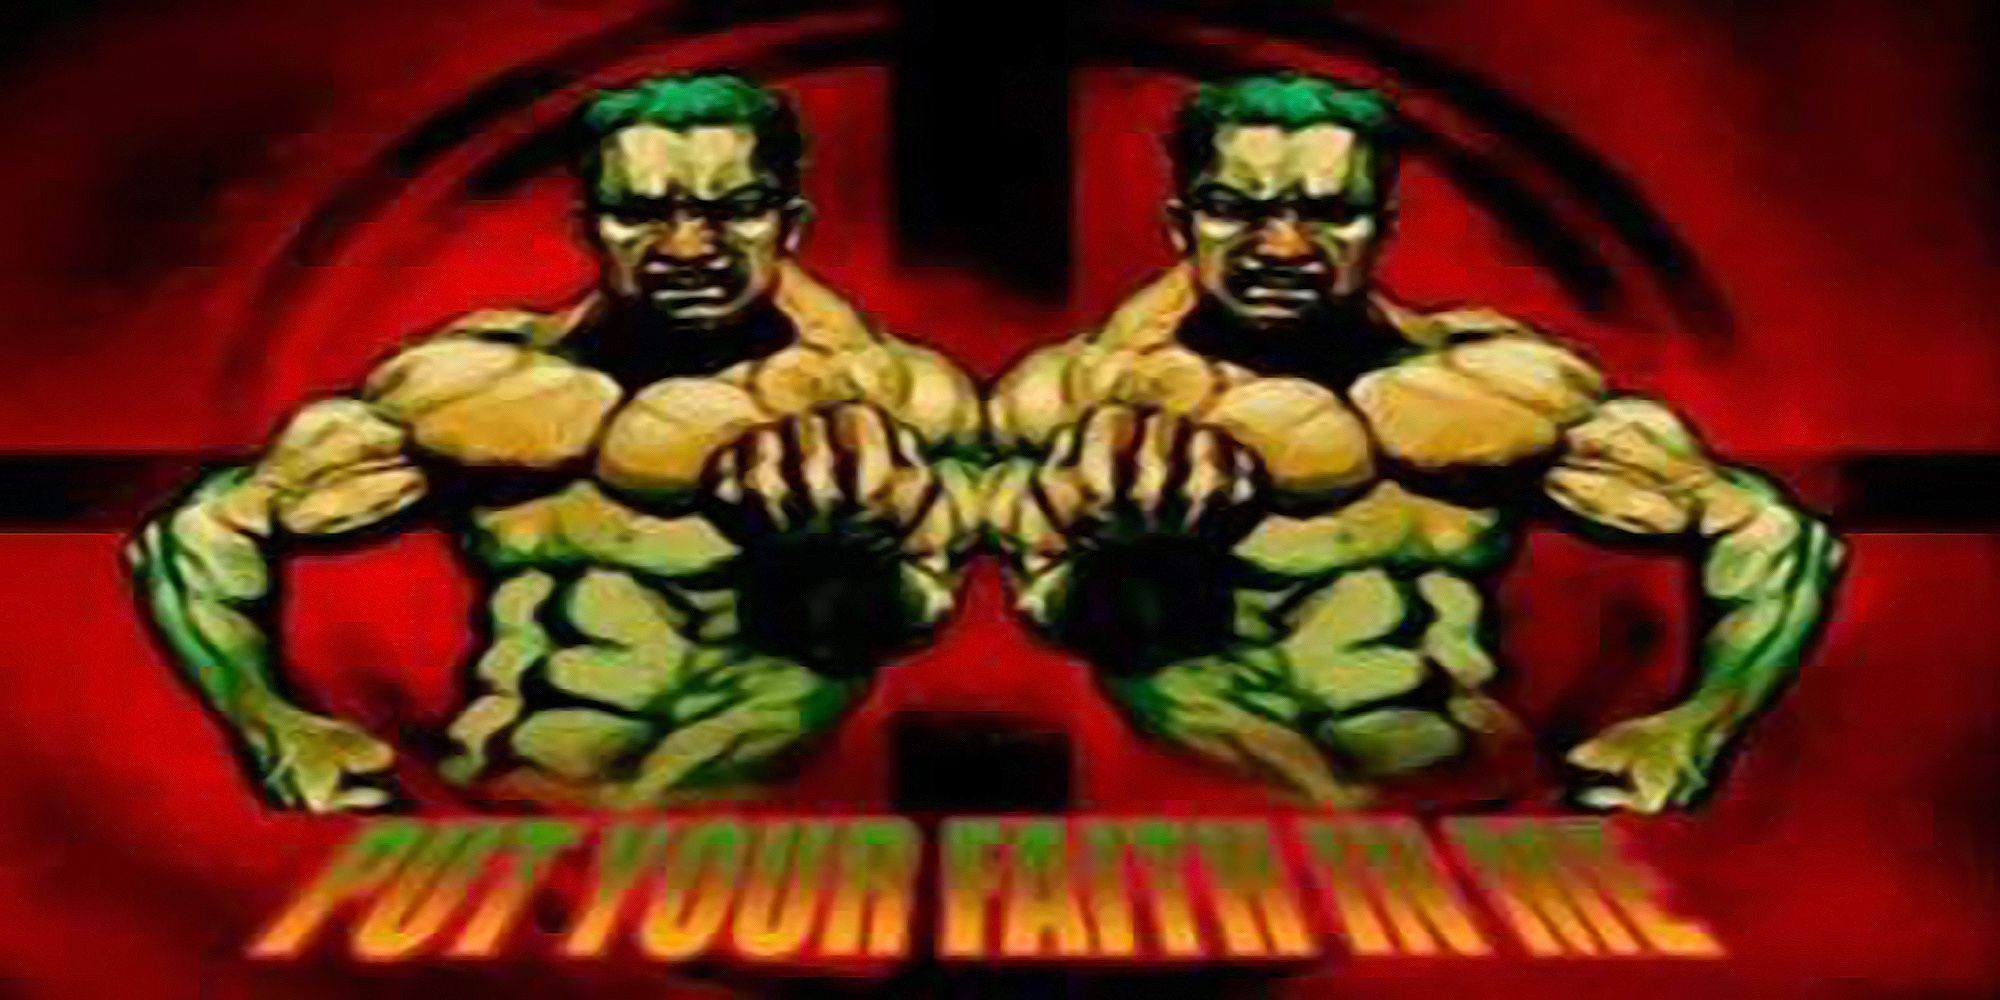 Two buff men flex against a target on the background art for the track, Put Your Faith In Me, from Dance Dance Revolution 2nd Mix.